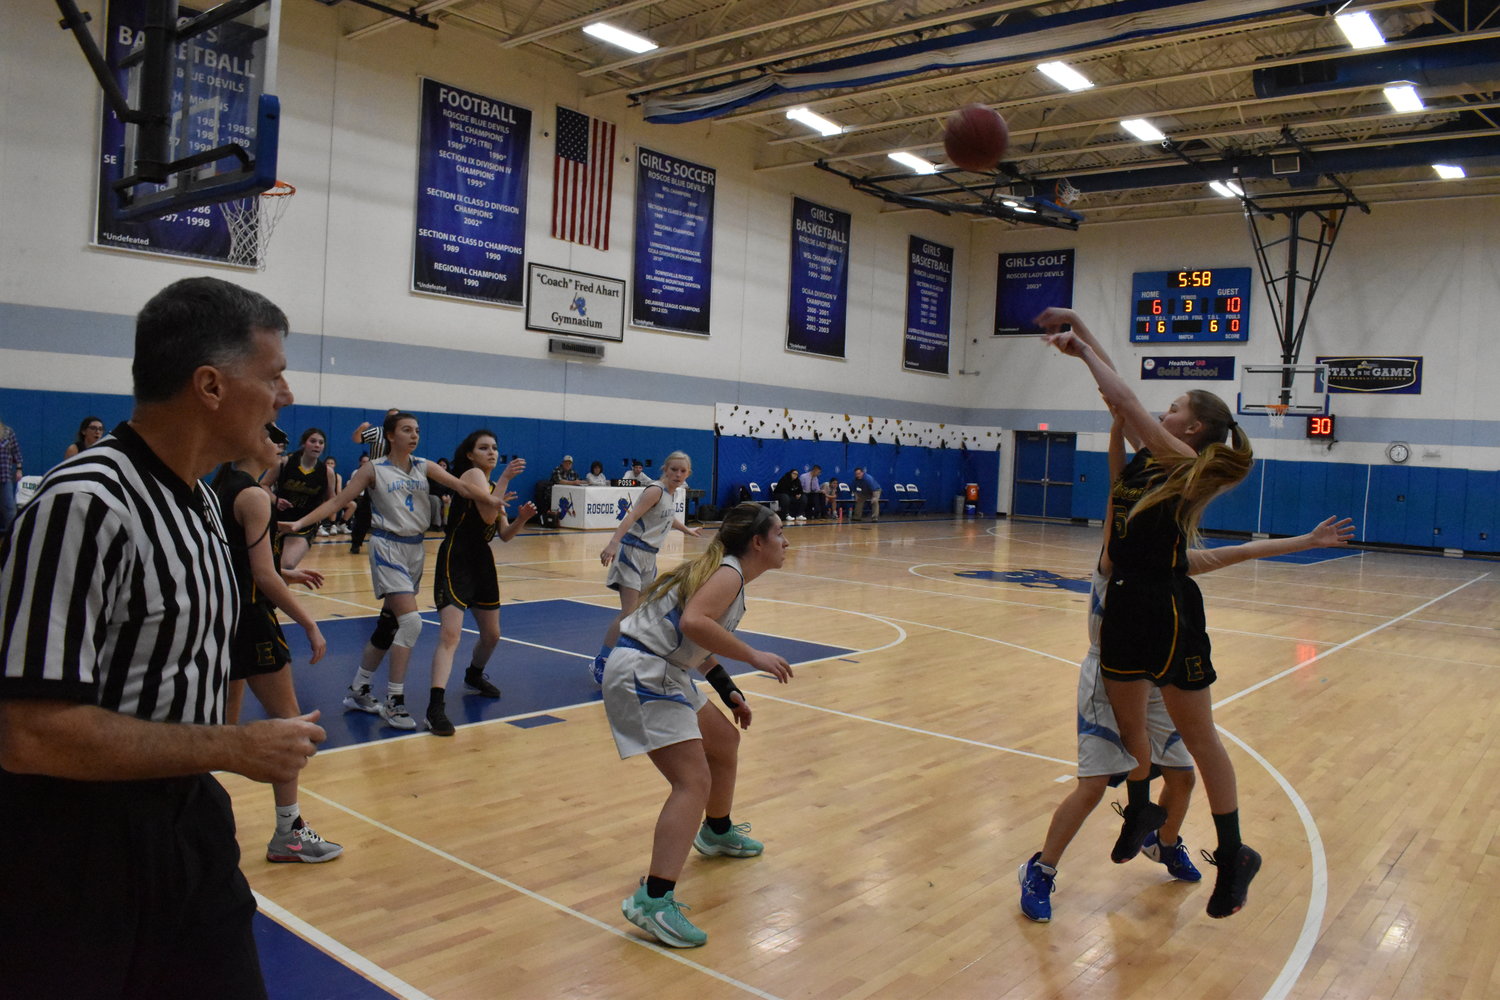 Regan Kizer draws a foul in the third quarter while going up for a jump shot. Her three points in the third quarter contributed to the winning stretch for Eldred.